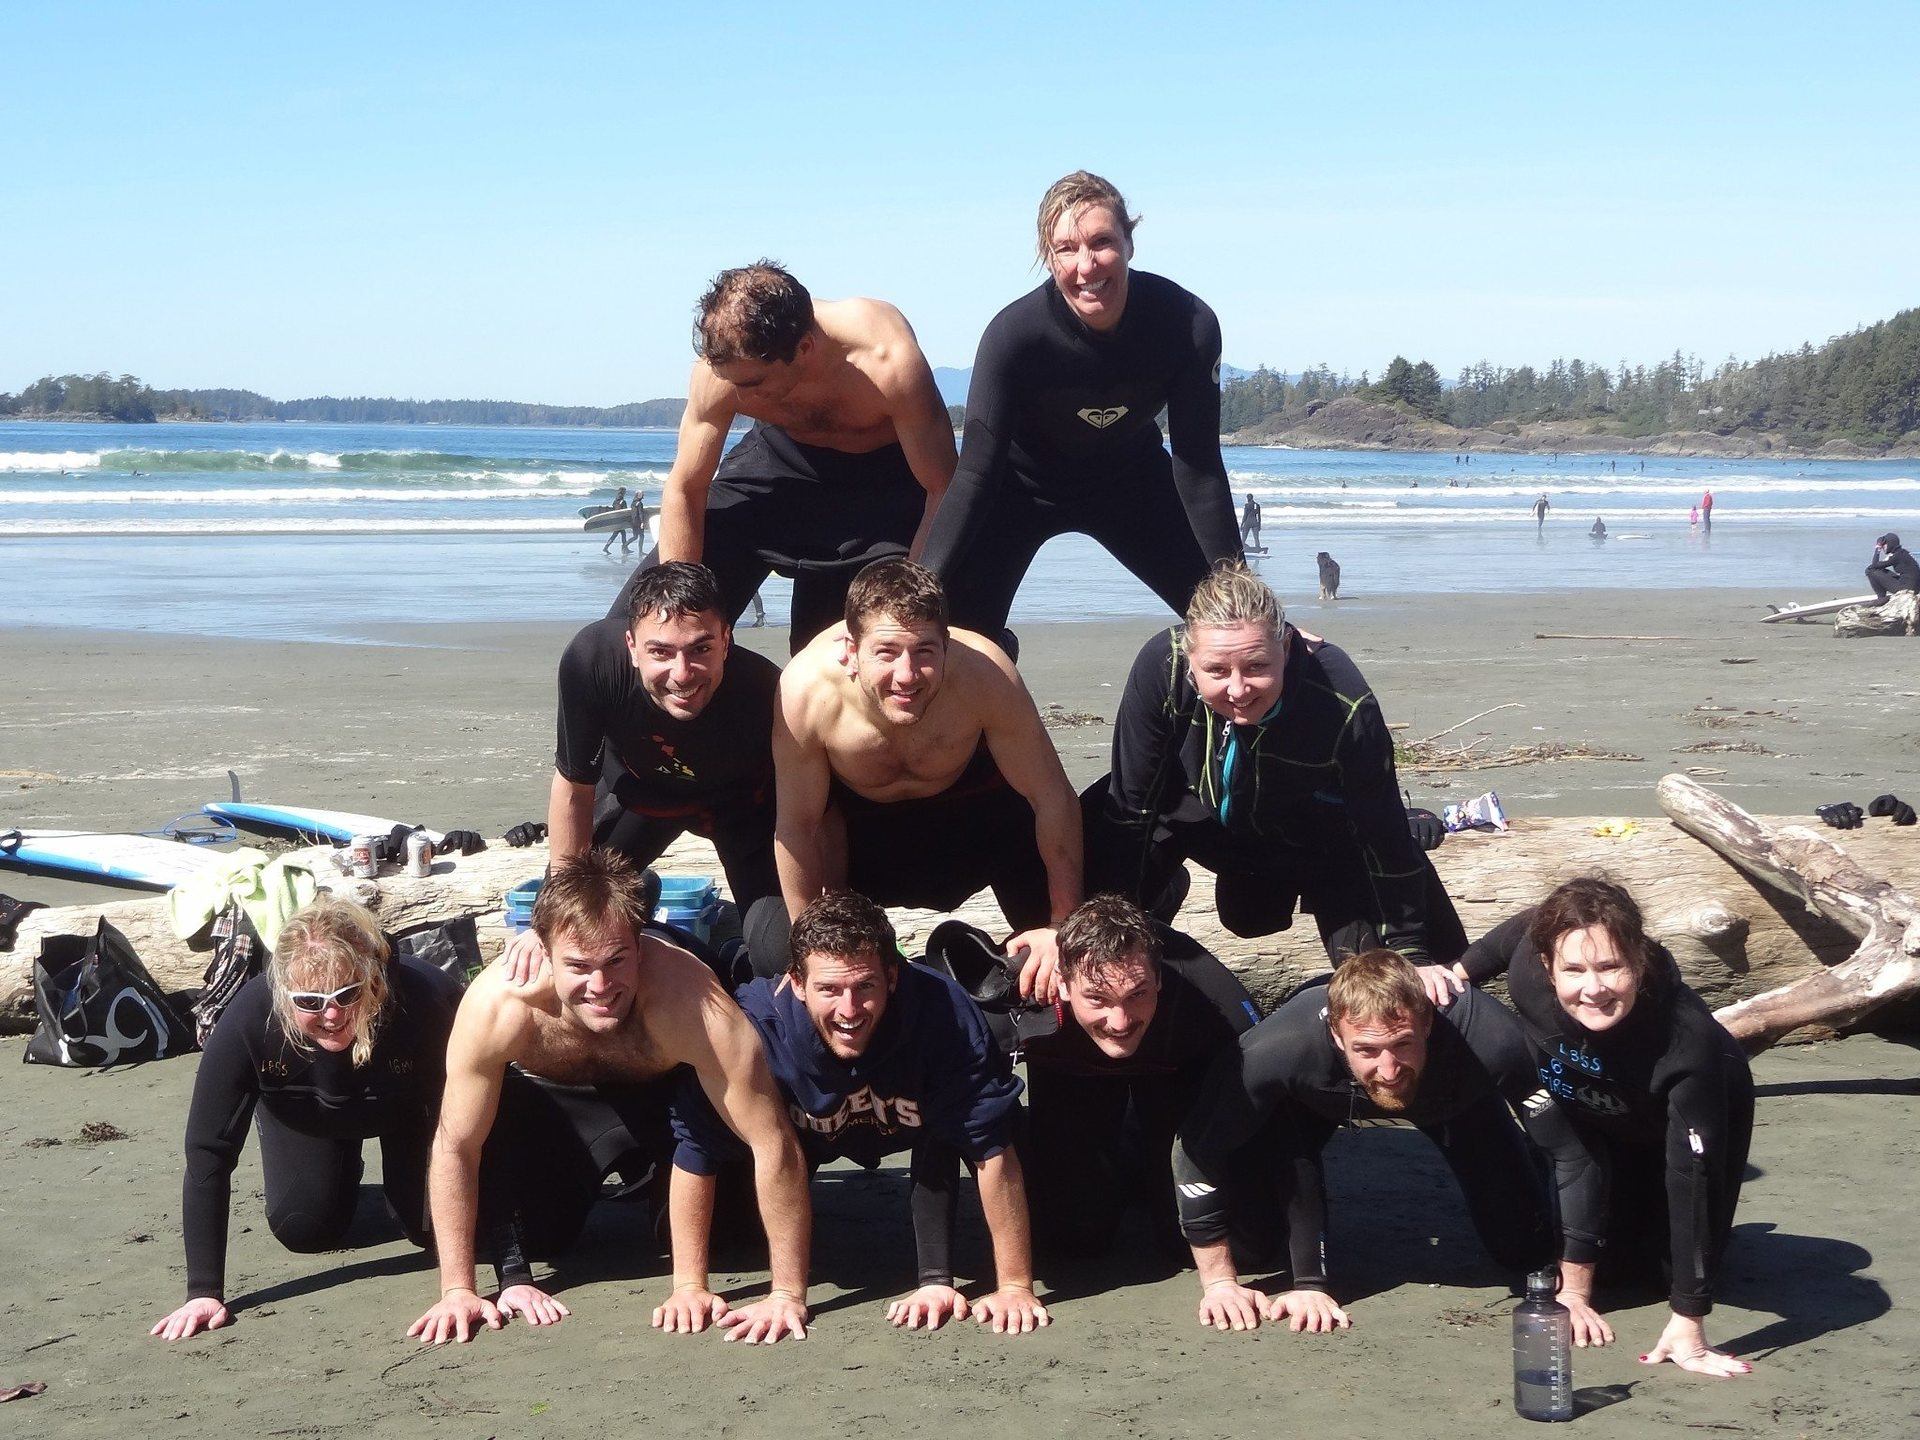 North Vancouver Boot Camp!